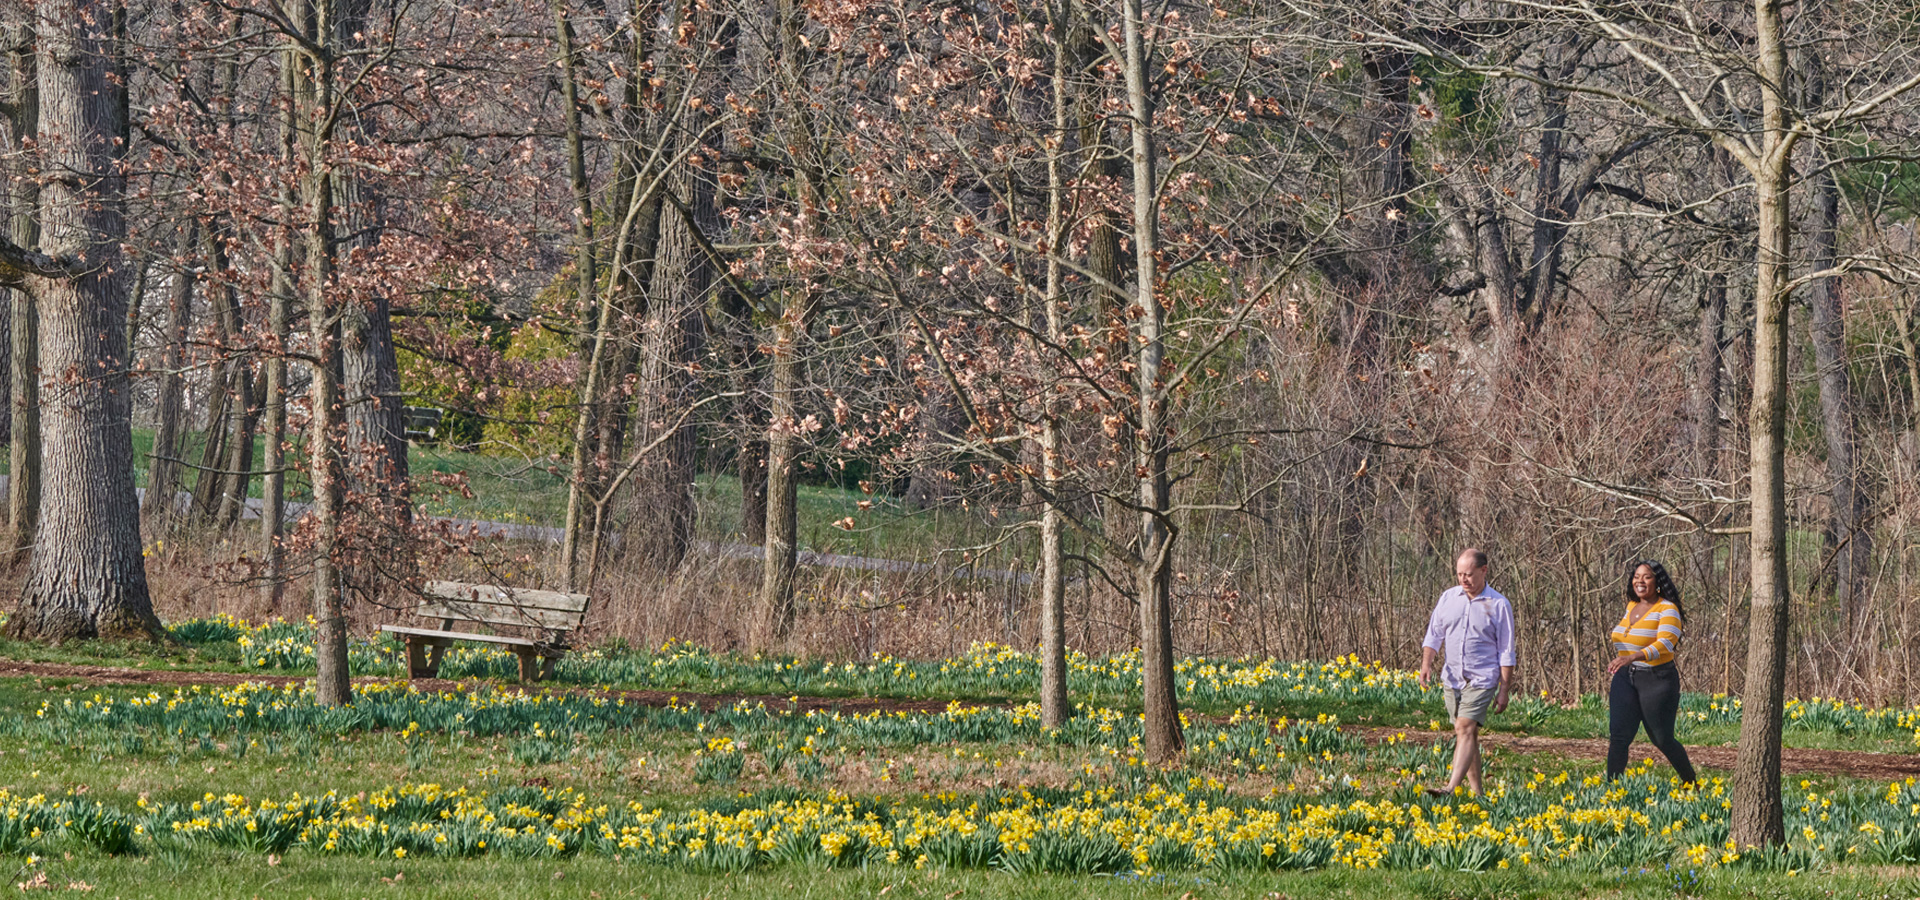 A couple walk among all of the blooming daffodils in early spring